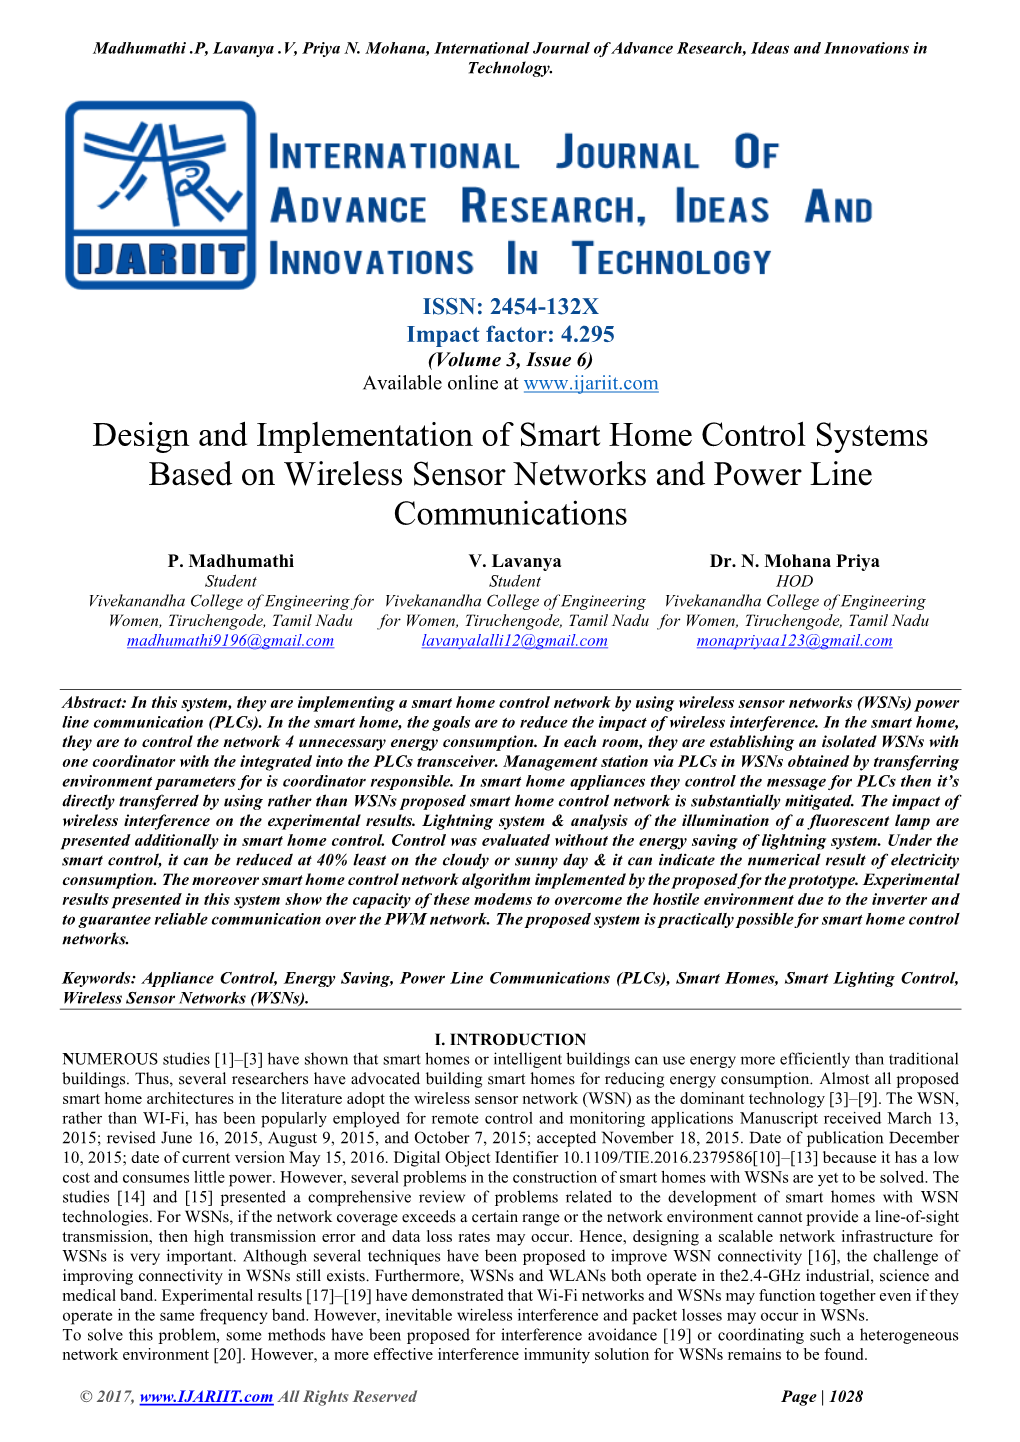 Design and Implementation of Smart Home Control Systems Based on Wireless Sensor Networks and Power Line Communications